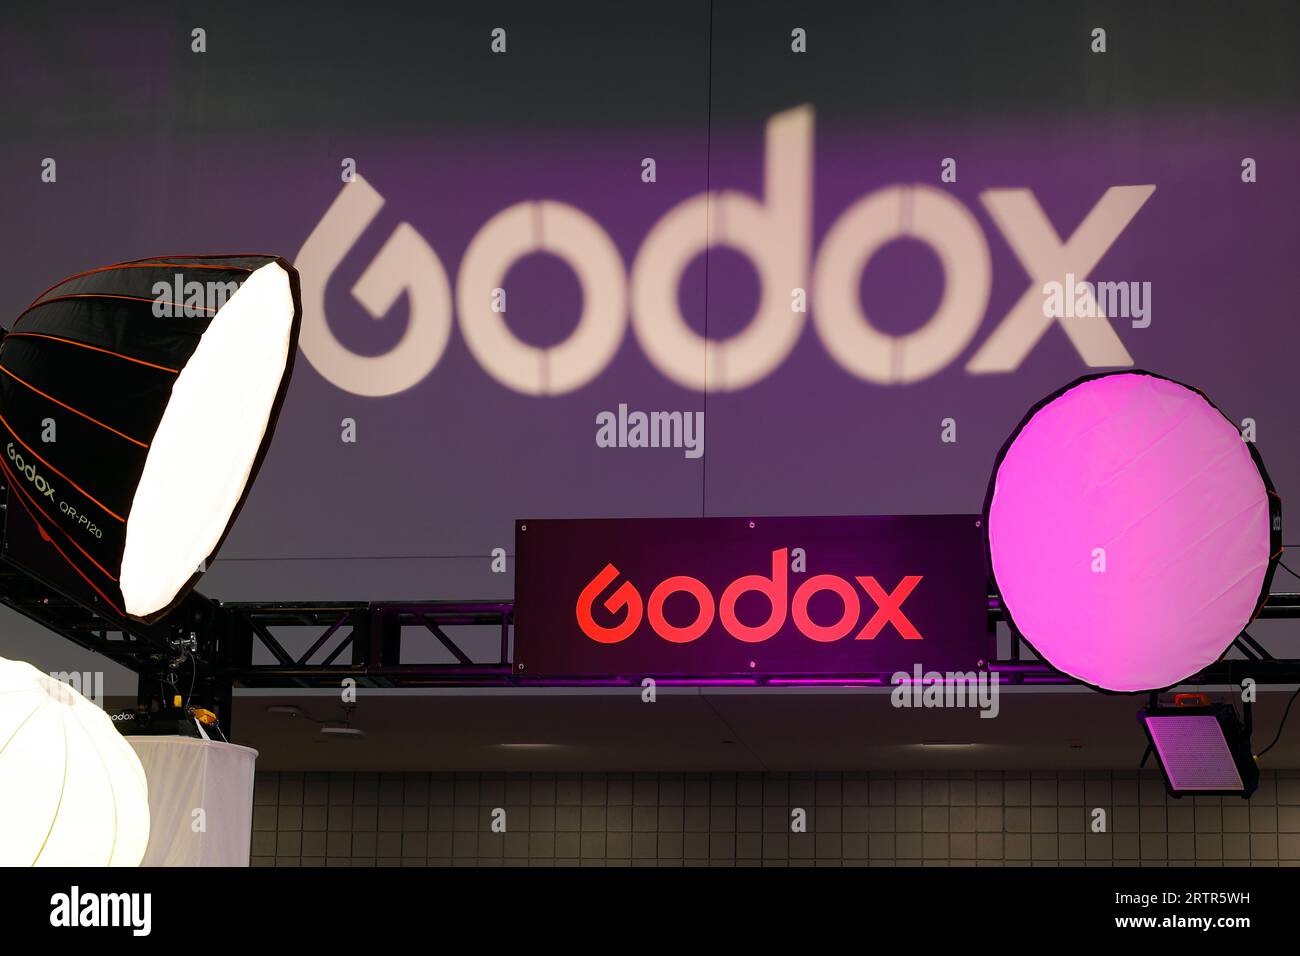 Signage for Godox photographic studio lighting equipment at a trade show exhibition. Stock Photo